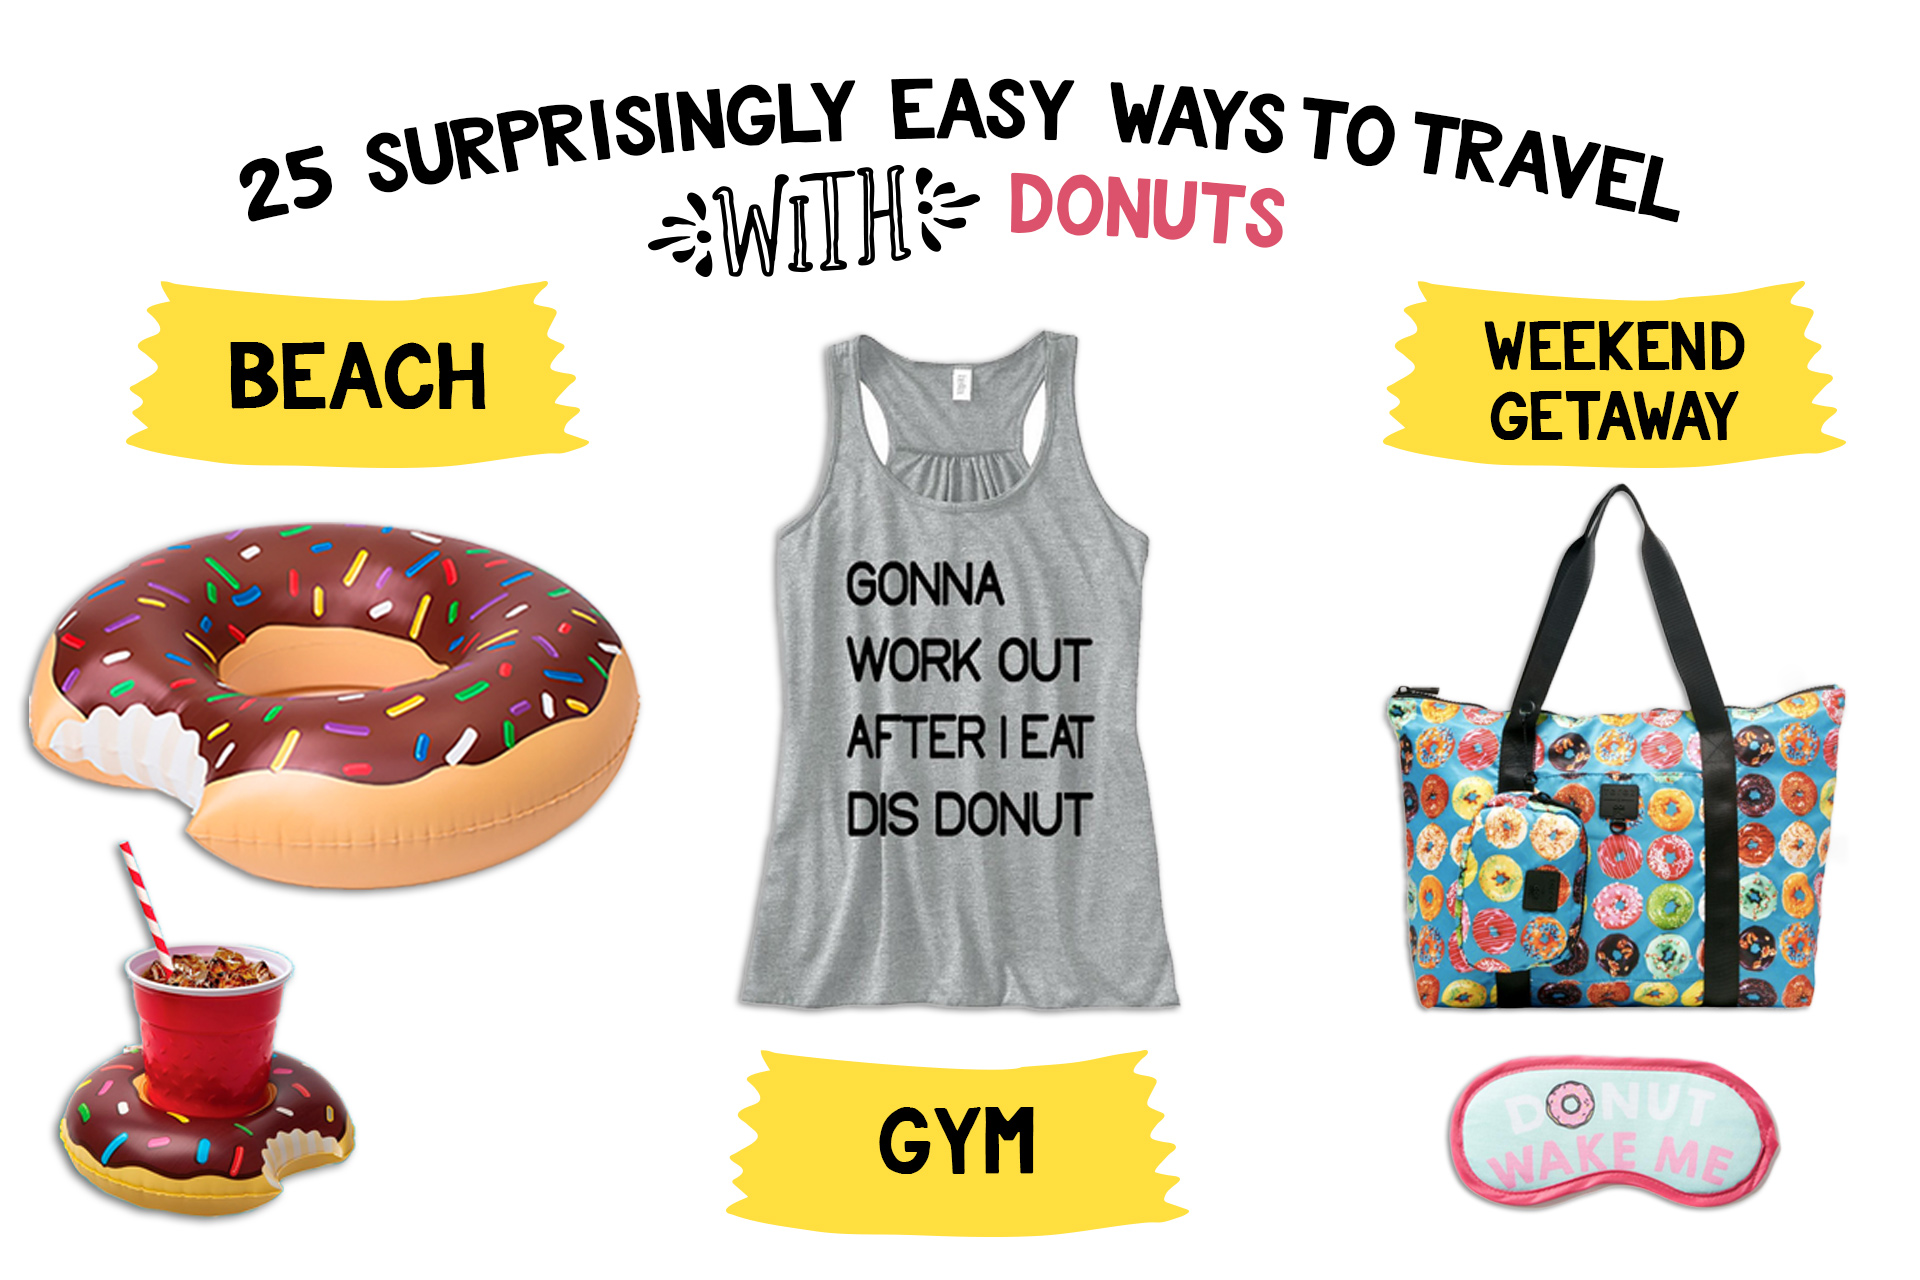 25 Surprisingly Easy Ways to Travel with Donuts